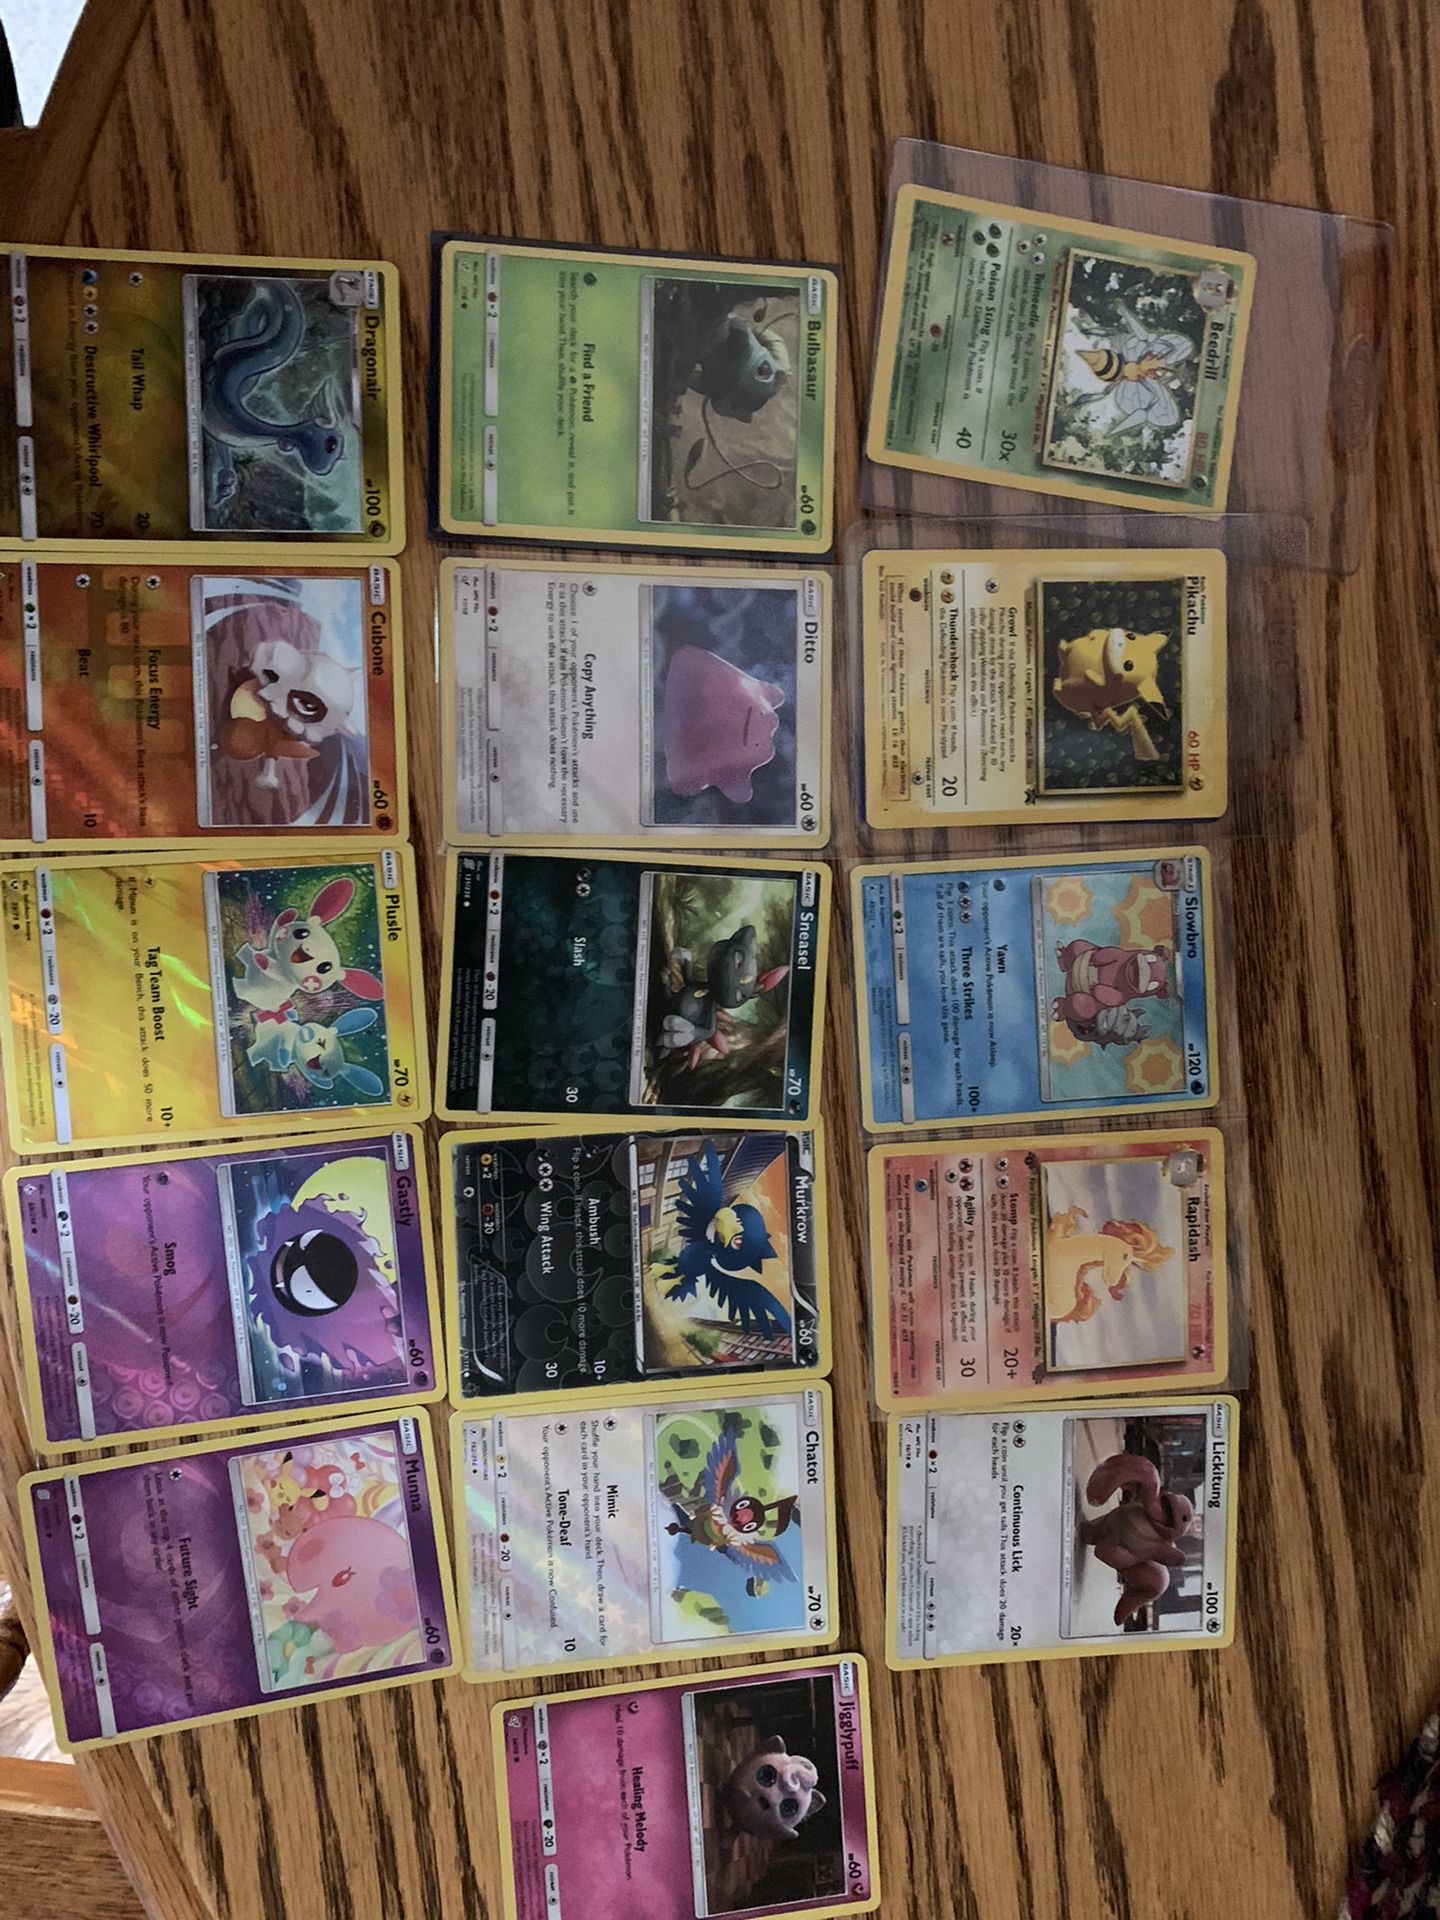 Mint condition Pokémon cards/online codes message for prices